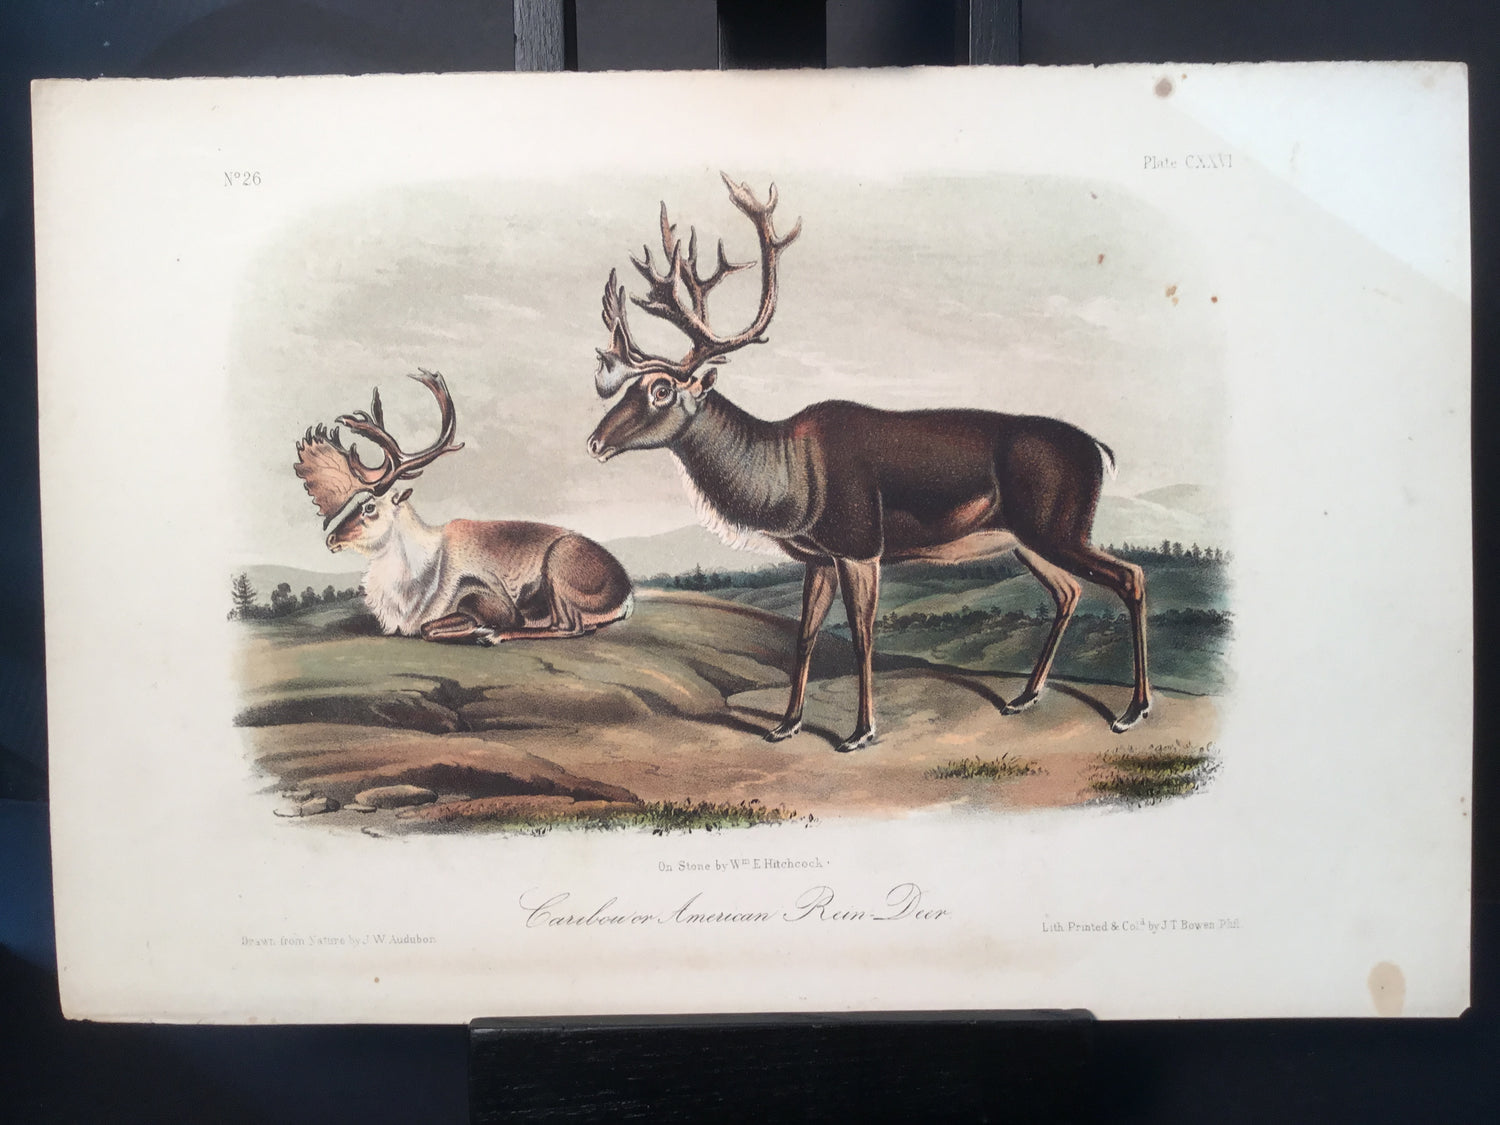 Lord-Hopkins Collection - Caribou or American Rein Deer